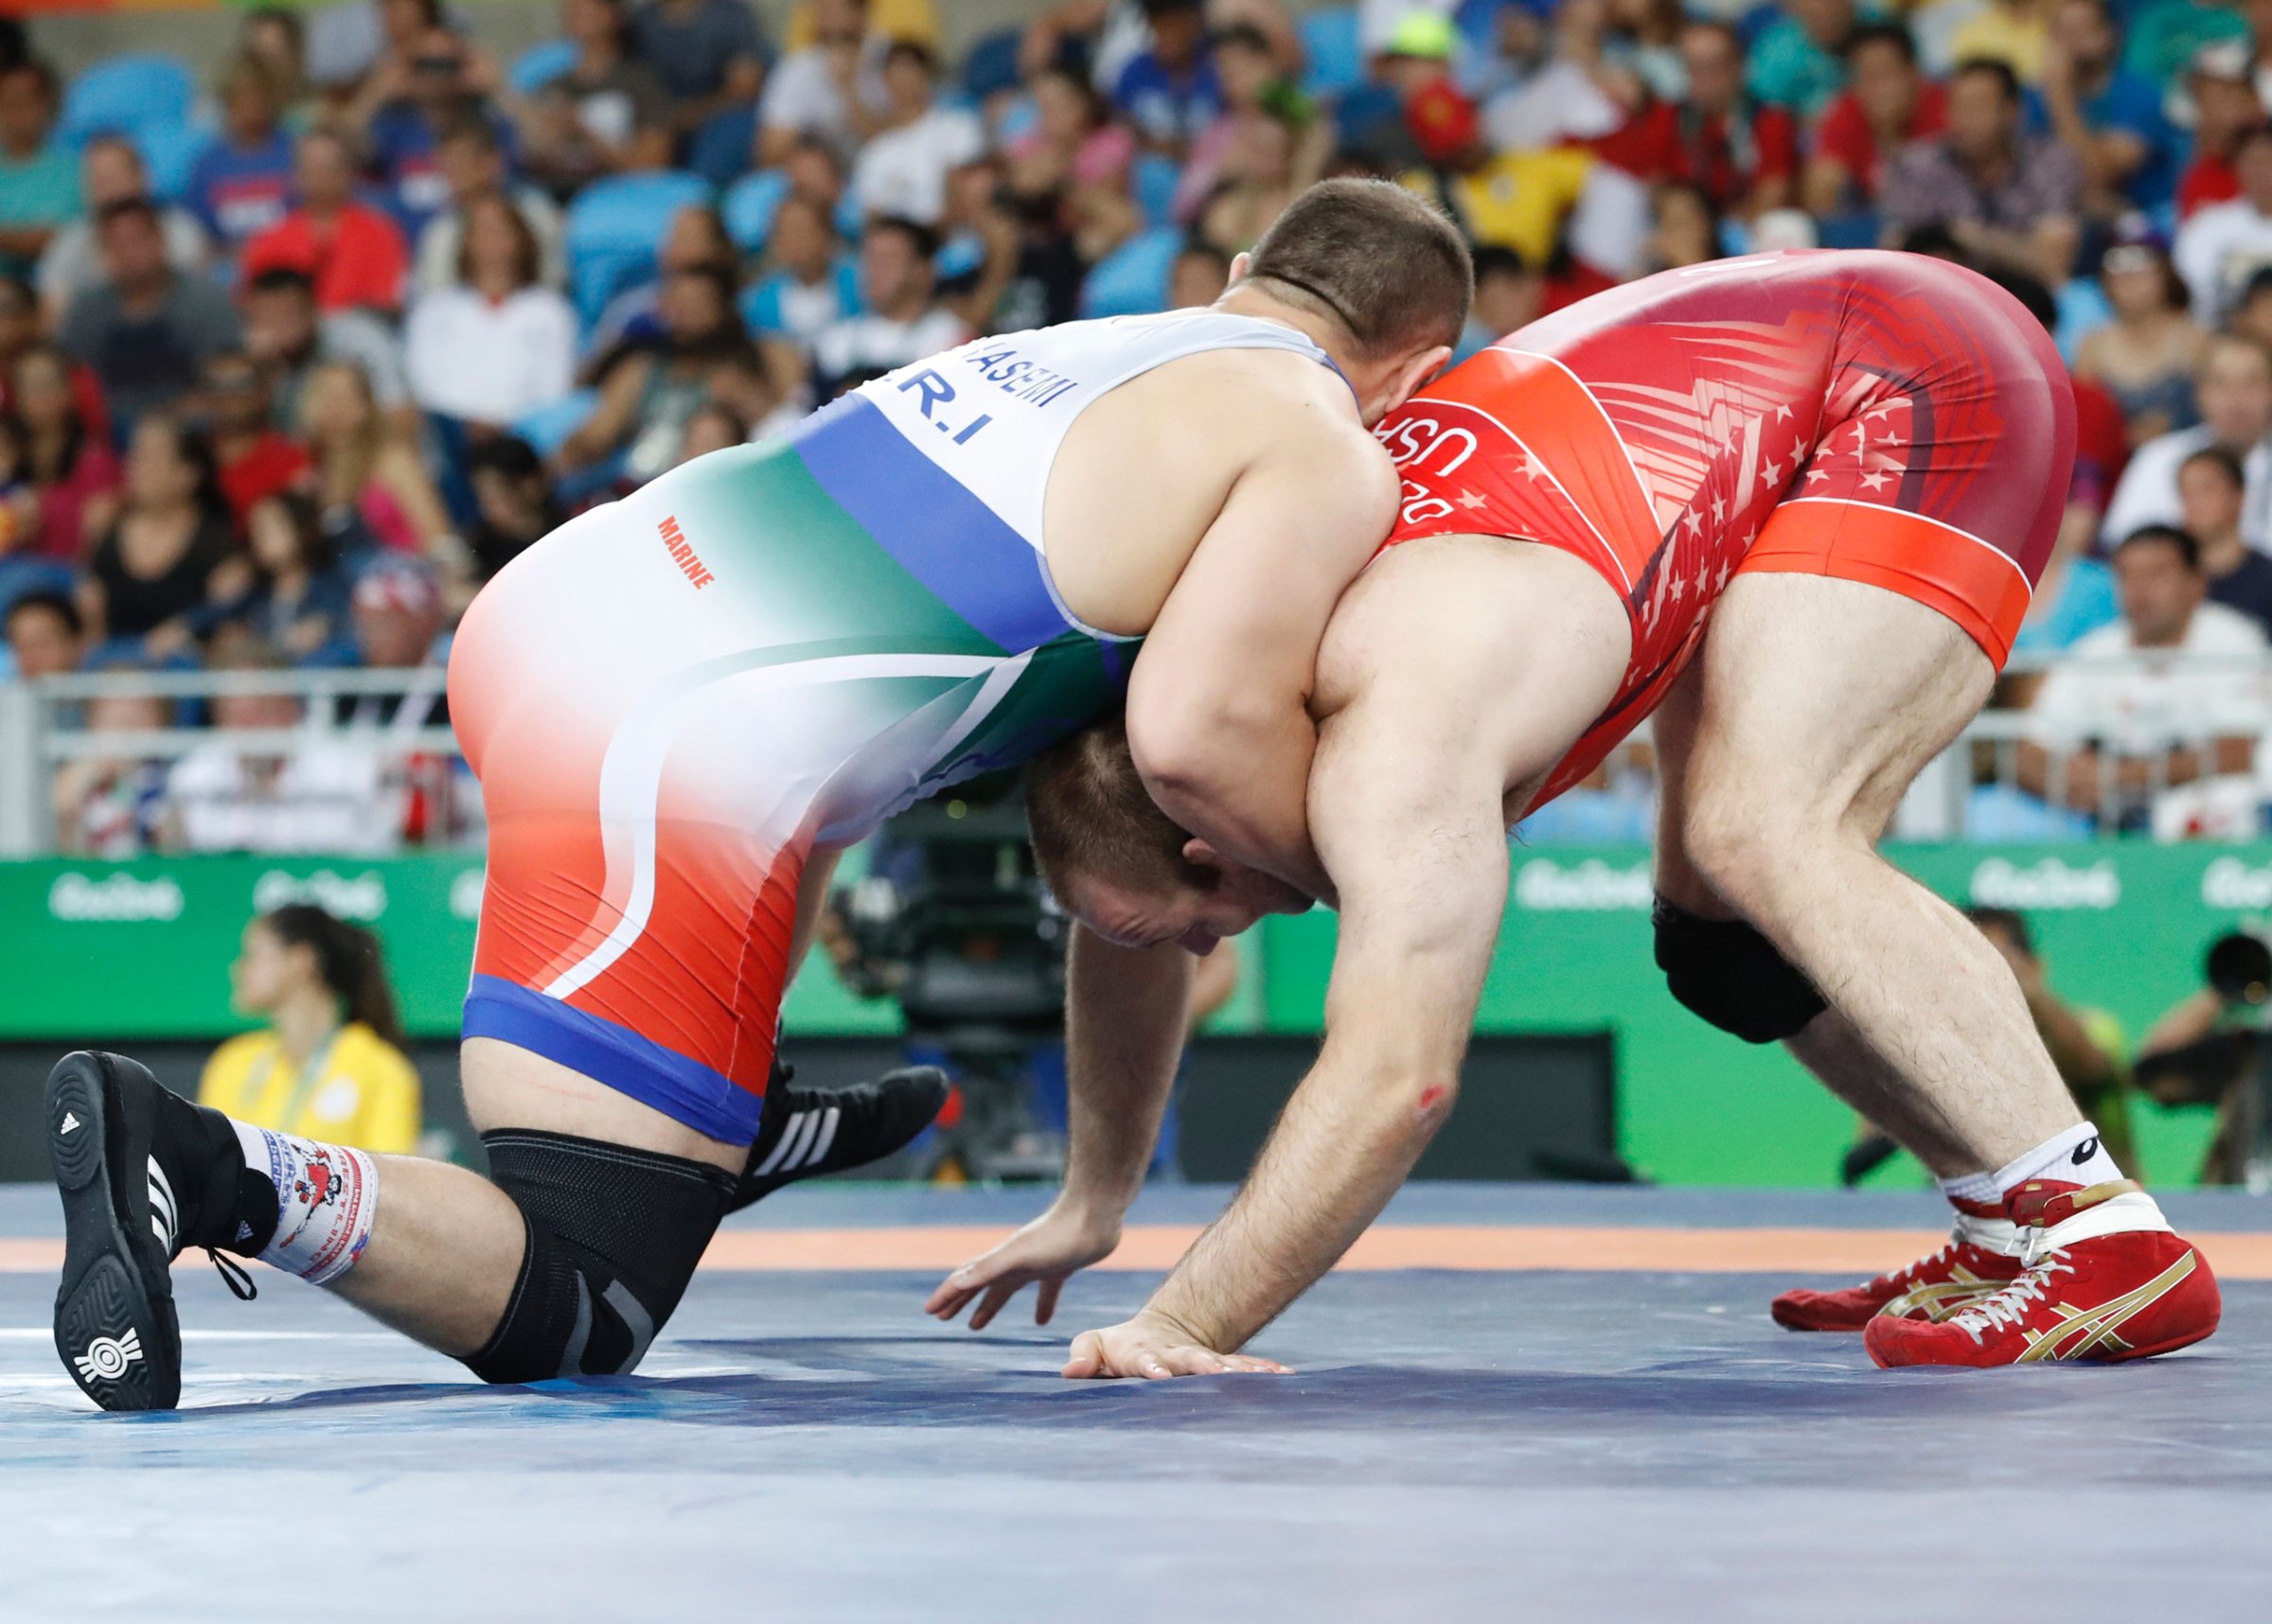 Iran's Komeil Nemat Ghasemi (blue) wrestles with USA's Tervel Ivaylov Dlagnev in their men's 125kg freestyle semi-final match on August 20, 2016, during the wrestling event of the Rio 2016 Olympic Games at the Carioca Arena 2 in Rio de Janeiro. / AFP / Jack GUEZ (Photo credit should read JACK GUEZ/AFP/Getty Images)